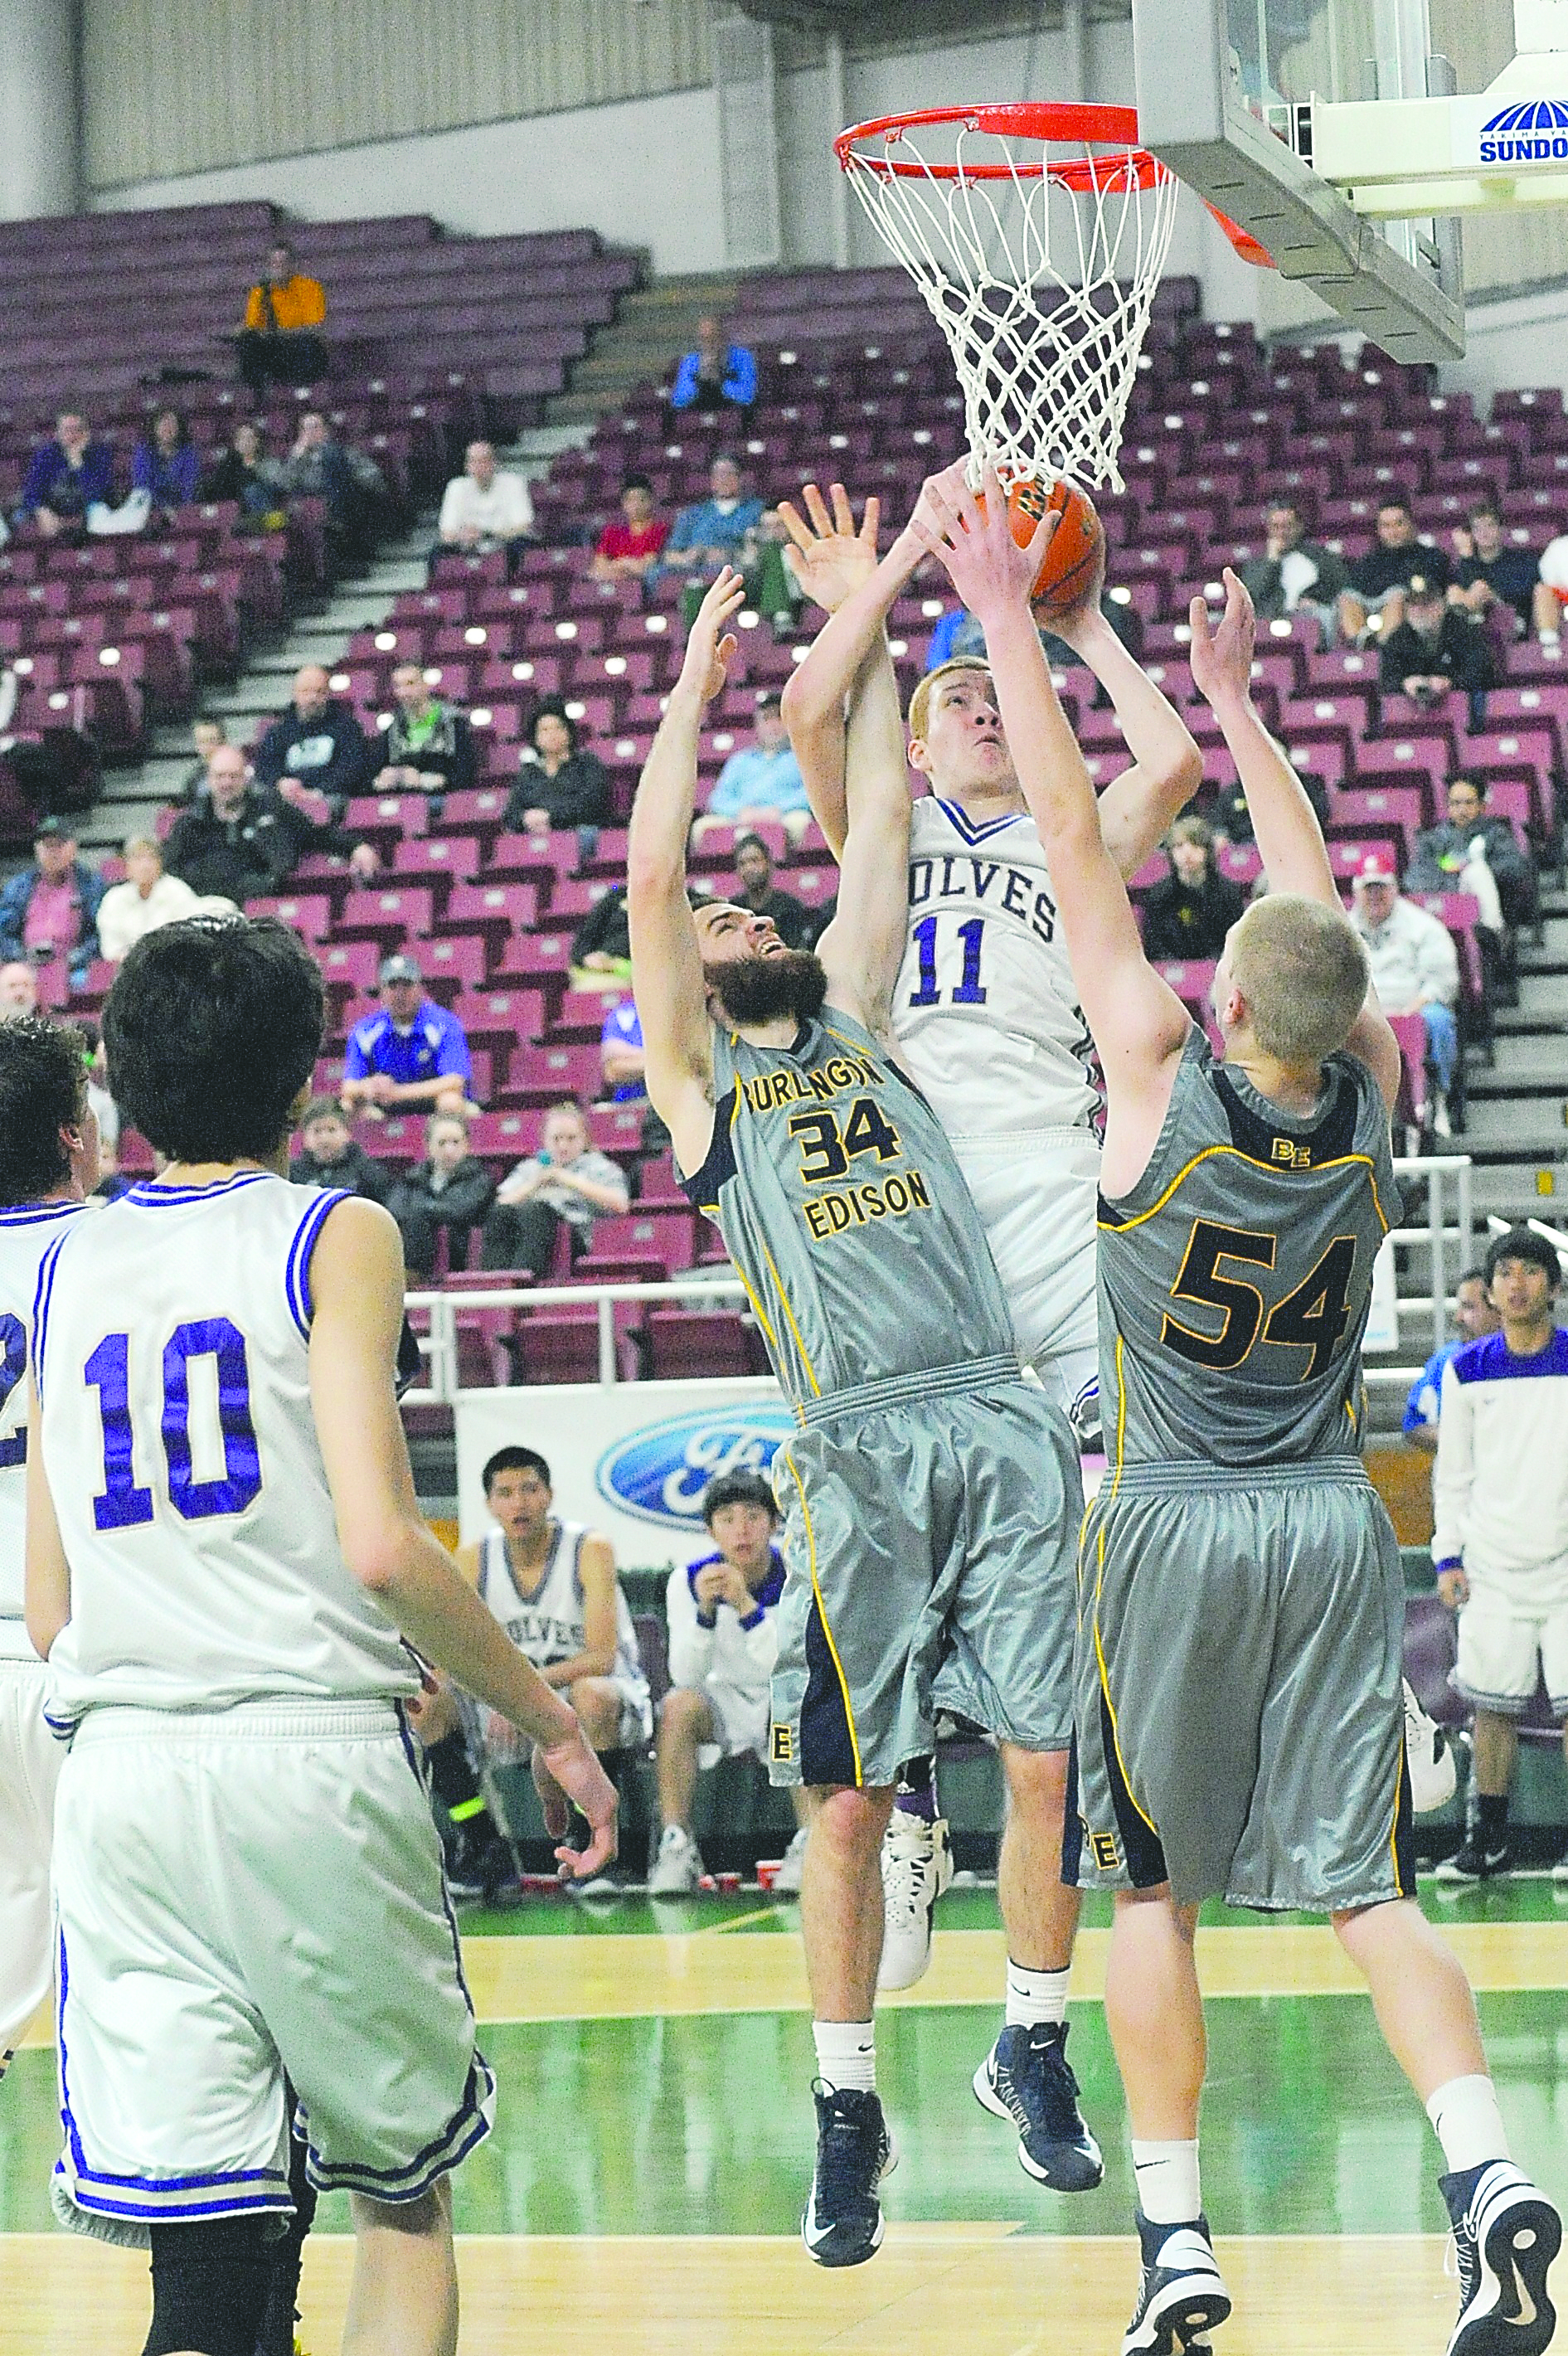 Sequim's Rory Kallappa attempts a shot against Burlington-Edison's Daron Browning (34) and Austin Van Herbulis (54) in the 2A fourth-place semifinals at the Yakima Valley SunDome on Friday. Lonnie Archibald/for Peninsula Daily News